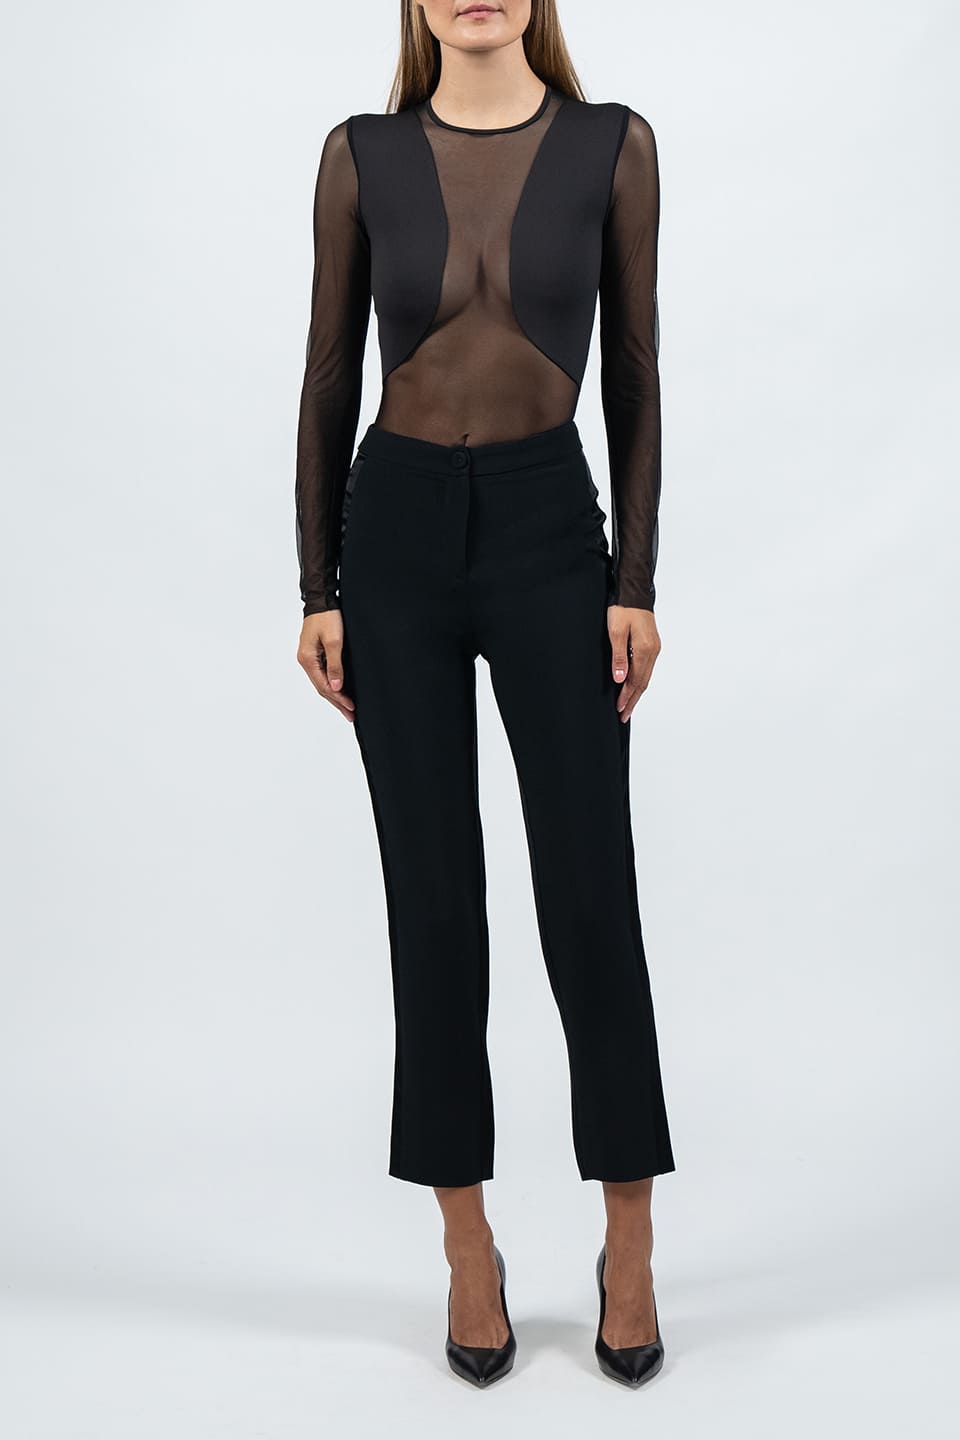 Designer Black Women pants, shop online with free delivery in UAE. Product gallery 5